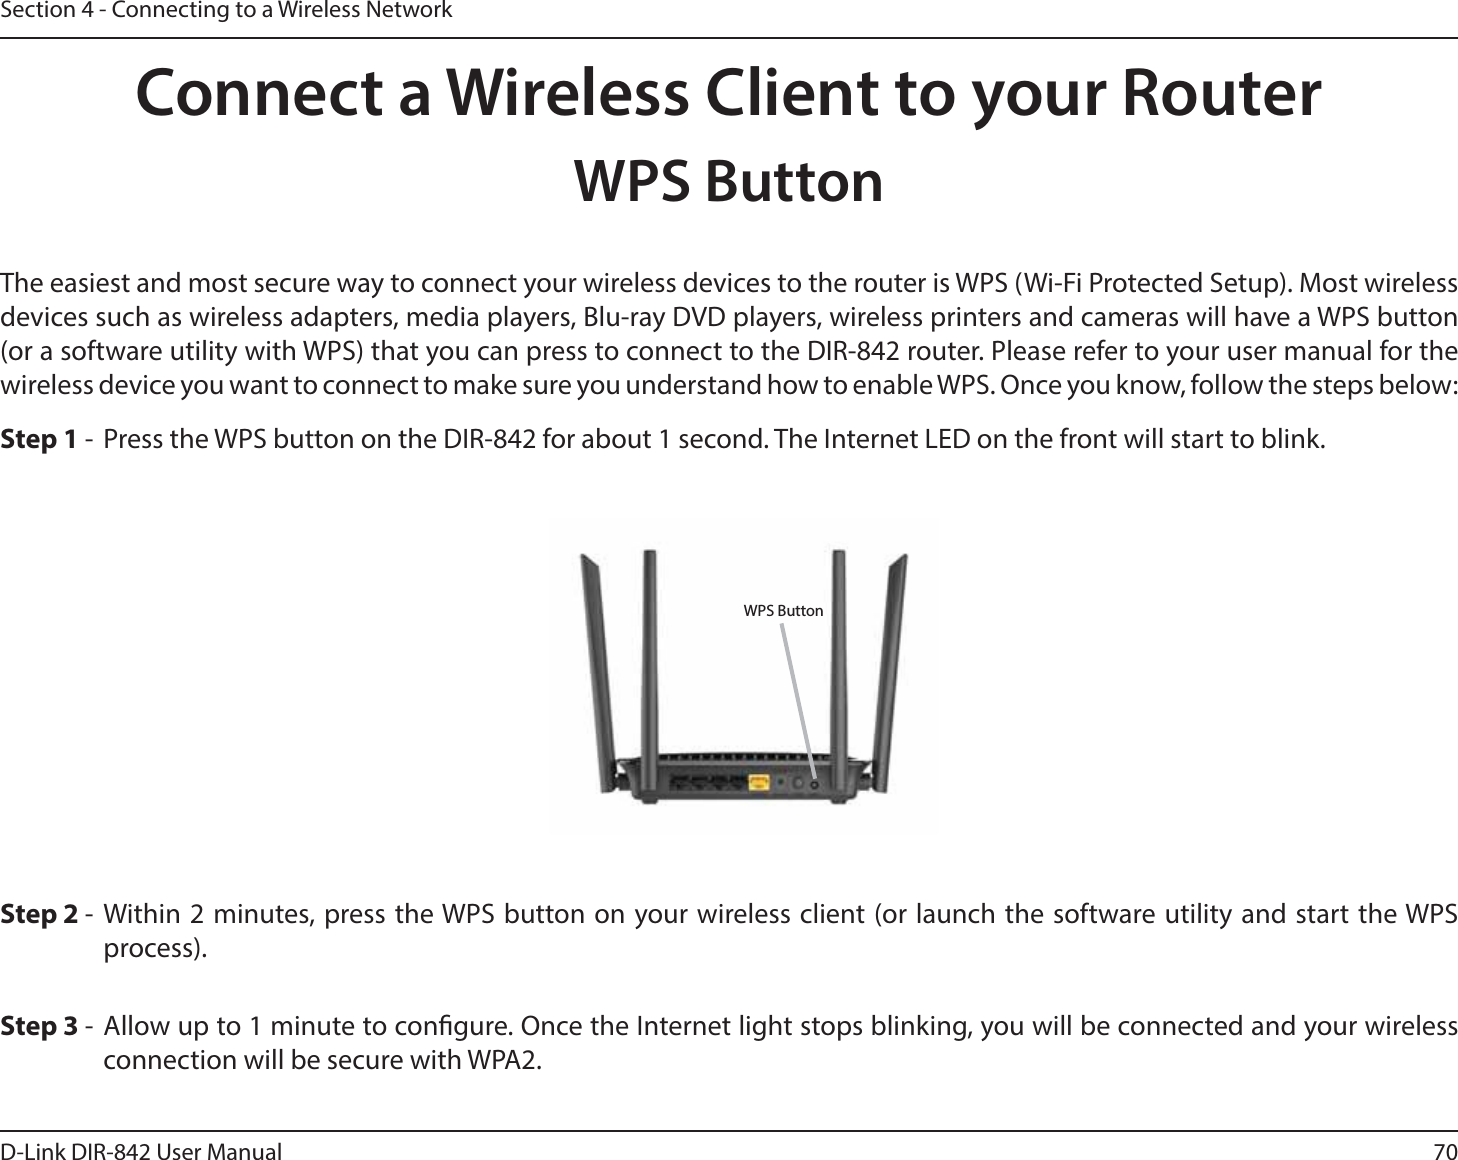 70D-Link DIR-842 User ManualSection 4 - Connecting to a Wireless NetworkConnect a Wireless Client to your RouterWPS Button4UFQ 8JUIJONJOVUFTQSFTTUIF814CVUUPOPOZPVSXJSFMFTTDMJFOUPSMBVODIUIFTPGUXBSFVUJMJUZBOE TUBSUUIF814QSPDFTT5IFFBTJFTUBOENPTUTFDVSFXBZUPDPOOFDUZPVSXJSFMFTTEFWJDFTUPUIFSPVUFSJT8148J&apos;J1SPUFDUFE4FUVQ.PTUXJSFMFTTdevices such as wireless adapters, media players, Blu-ray DVD players, wireless printers and cameras will have a WPS button PSBTPGUXBSFVUJMJUZXJUI814UIBUZPVDBOQSFTTUPDPOOFDUUPUIF%*3SPVUFS1MFBTFSFGFSUPZPVSVTFSNBOVBMGPSUIFwireless device you want to connect to make sure you understand how to enable WPS. Once you know, follow the steps below:Step 1 -  Press the WPS button on the DIR-842 for about 1 second. The Internet LED on the front will start to blink.Step 3 - Allow up to 1 minute to congure. Once the Internet light stops blinking, you will be connected and your wireless connection will be secure with WPA2.WPS Button